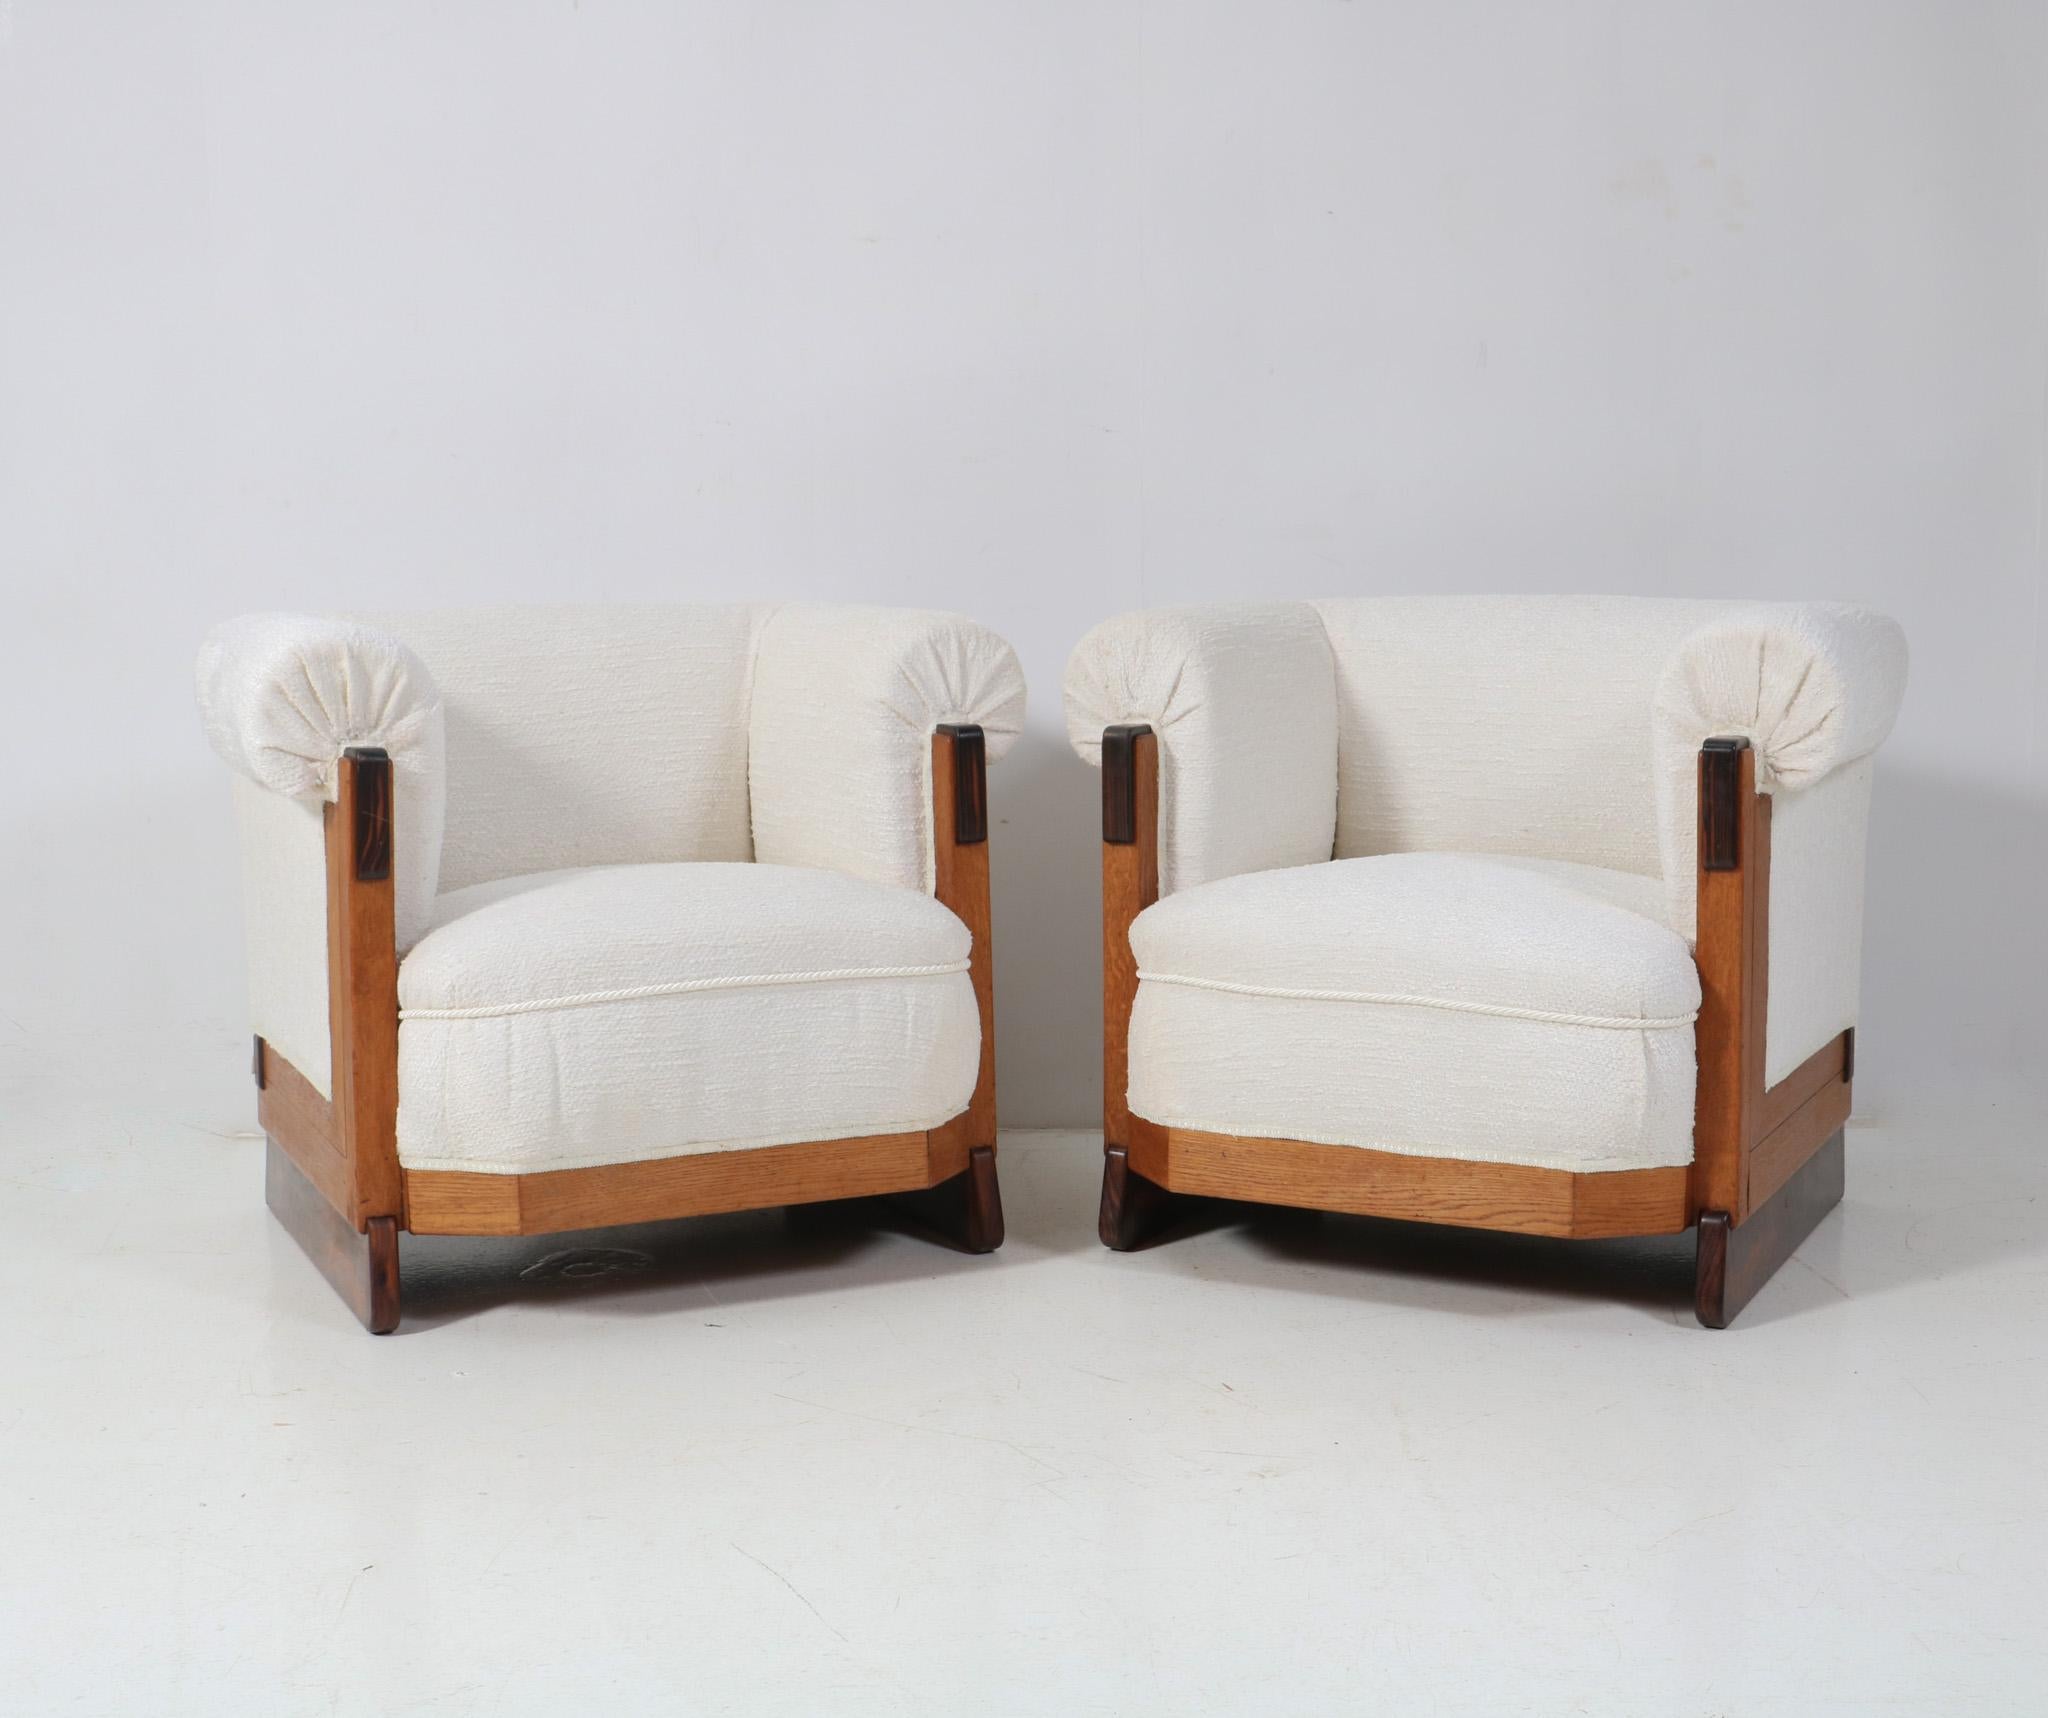 Magnificent and ultra rare pair of Art Deco Modernist lounge chairs.
Design by Anton Lucas for N.V. Meubelkunst Leiden.
Striking Dutch design from the 1920s.
Solid oak frames with original solid macassar elements.
Re-upholstered with an off-white